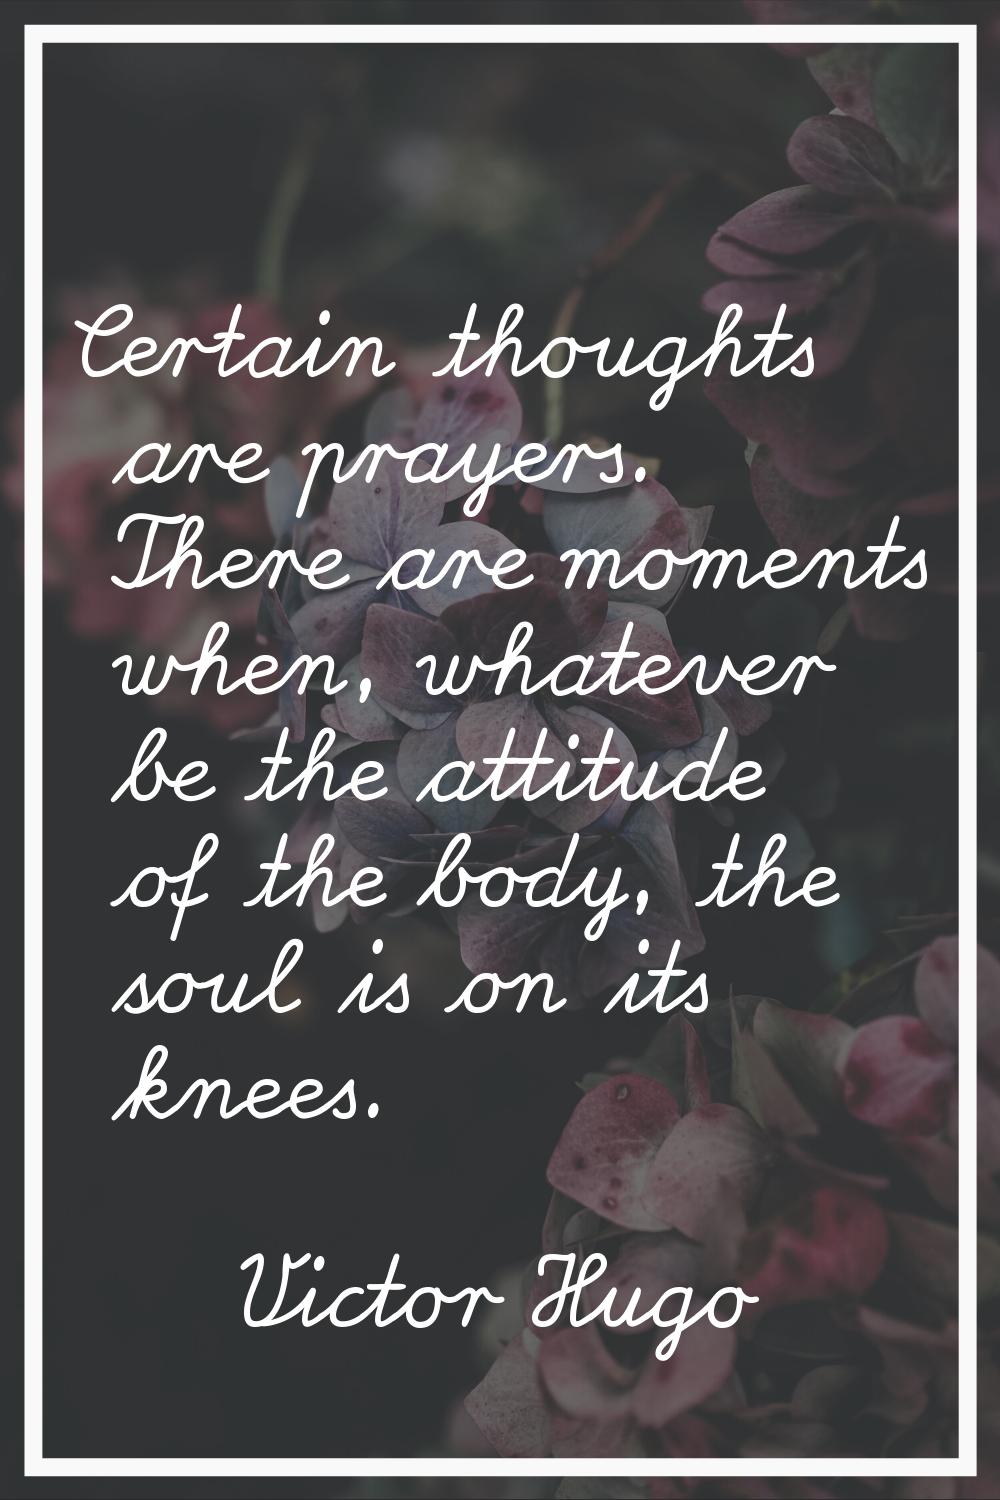 Certain thoughts are prayers. There are moments when, whatever be the attitude of the body, the sou